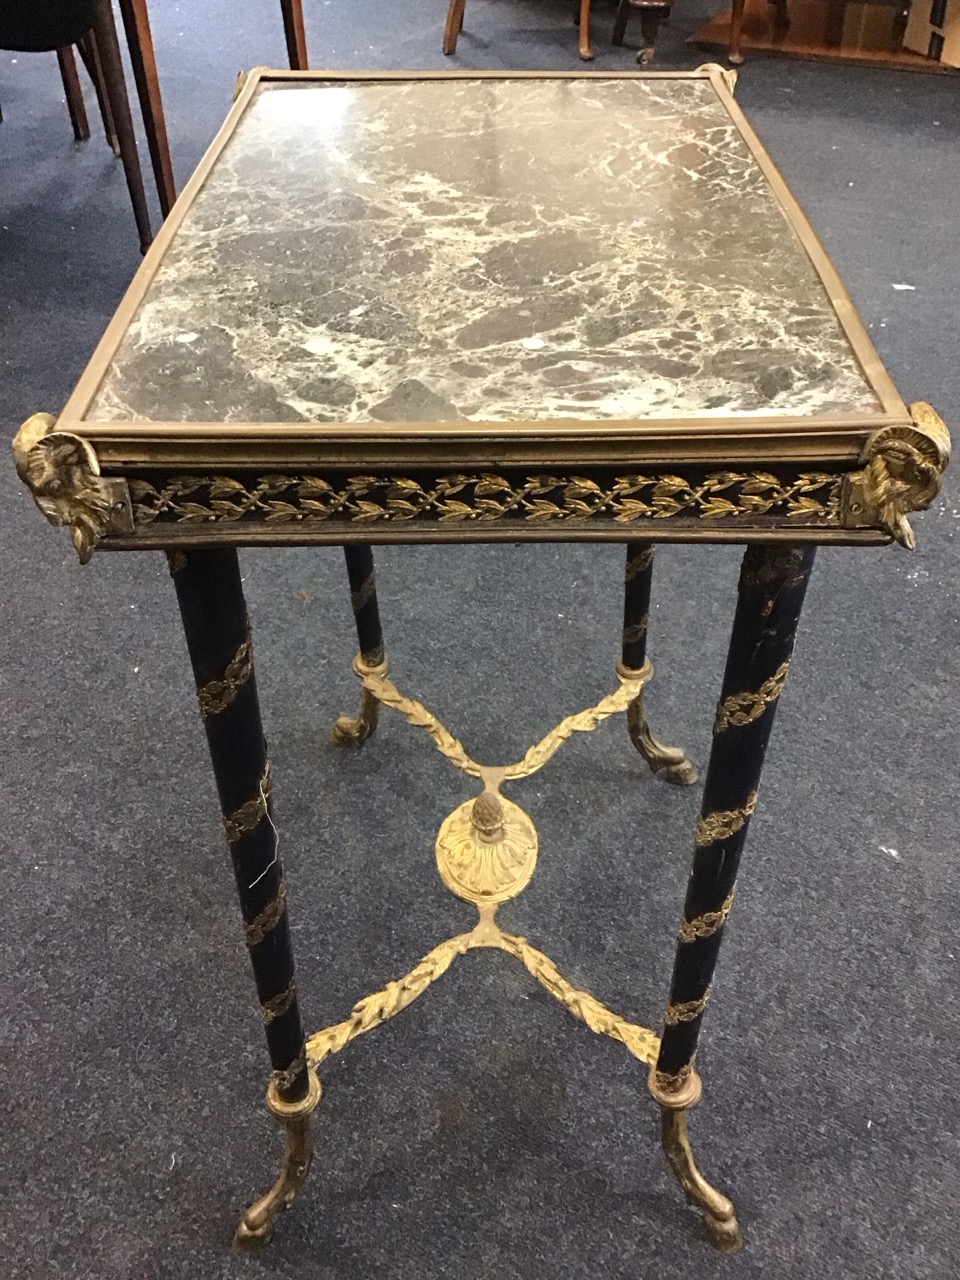 A C19th rectangular Louis XVI style marble top ebonised and ormolu mounted guéridon centre table - Image 3 of 3